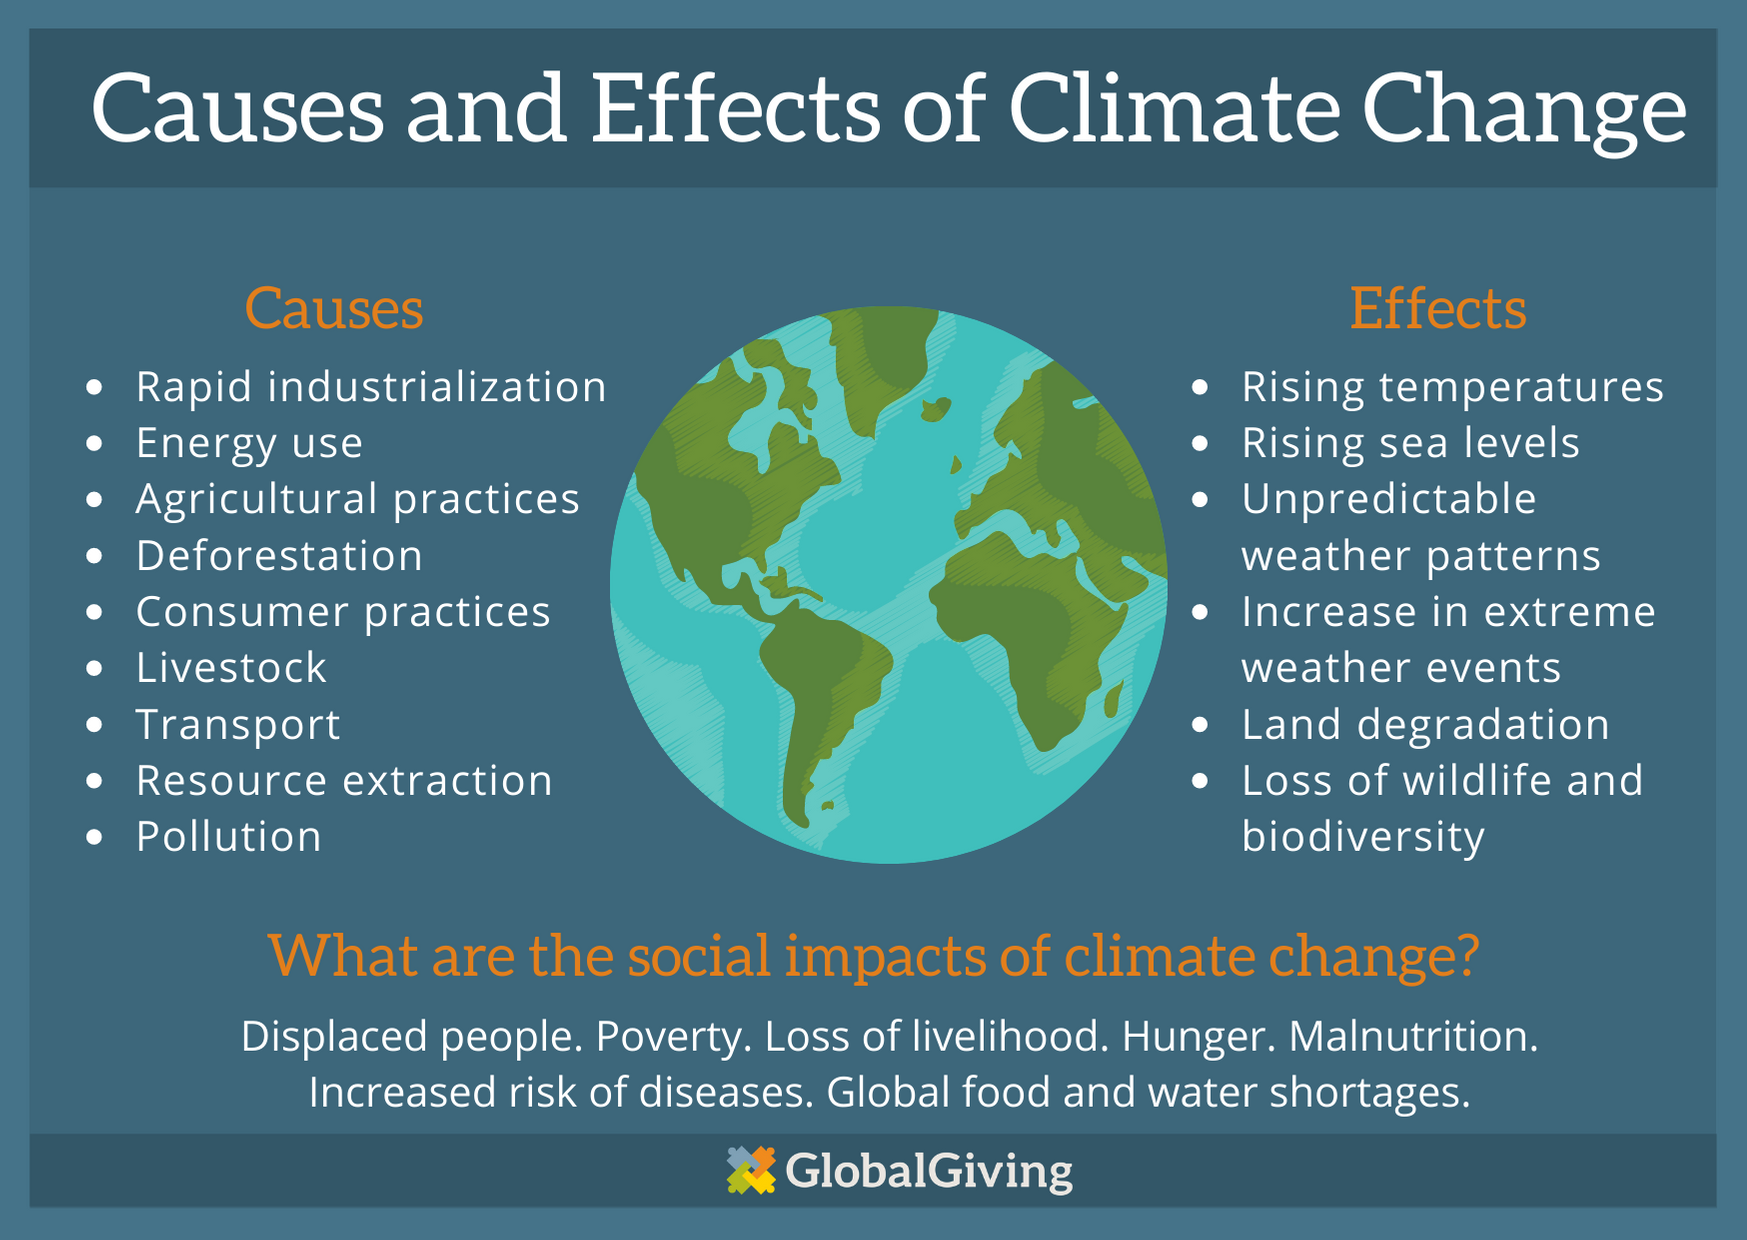 An infographic outlining the effects of climate change. Causes and effects of Climate Change. Causes: rapid industrialisation, energy use, agricultural practices, deforestation, consumer practices, livestock, Transport, resource extraction and pollution. Effects: rising temperatures, rising sea levels, unpredictable weather patterns, increase in extreme weather events, land degradation, loss of wildlife and biodiversity. What are the social impacts of climate change? Displaces people, poverty, loss of livelihoods, hunger, malnutrition, increased risk of diseases and global food and water shortages.